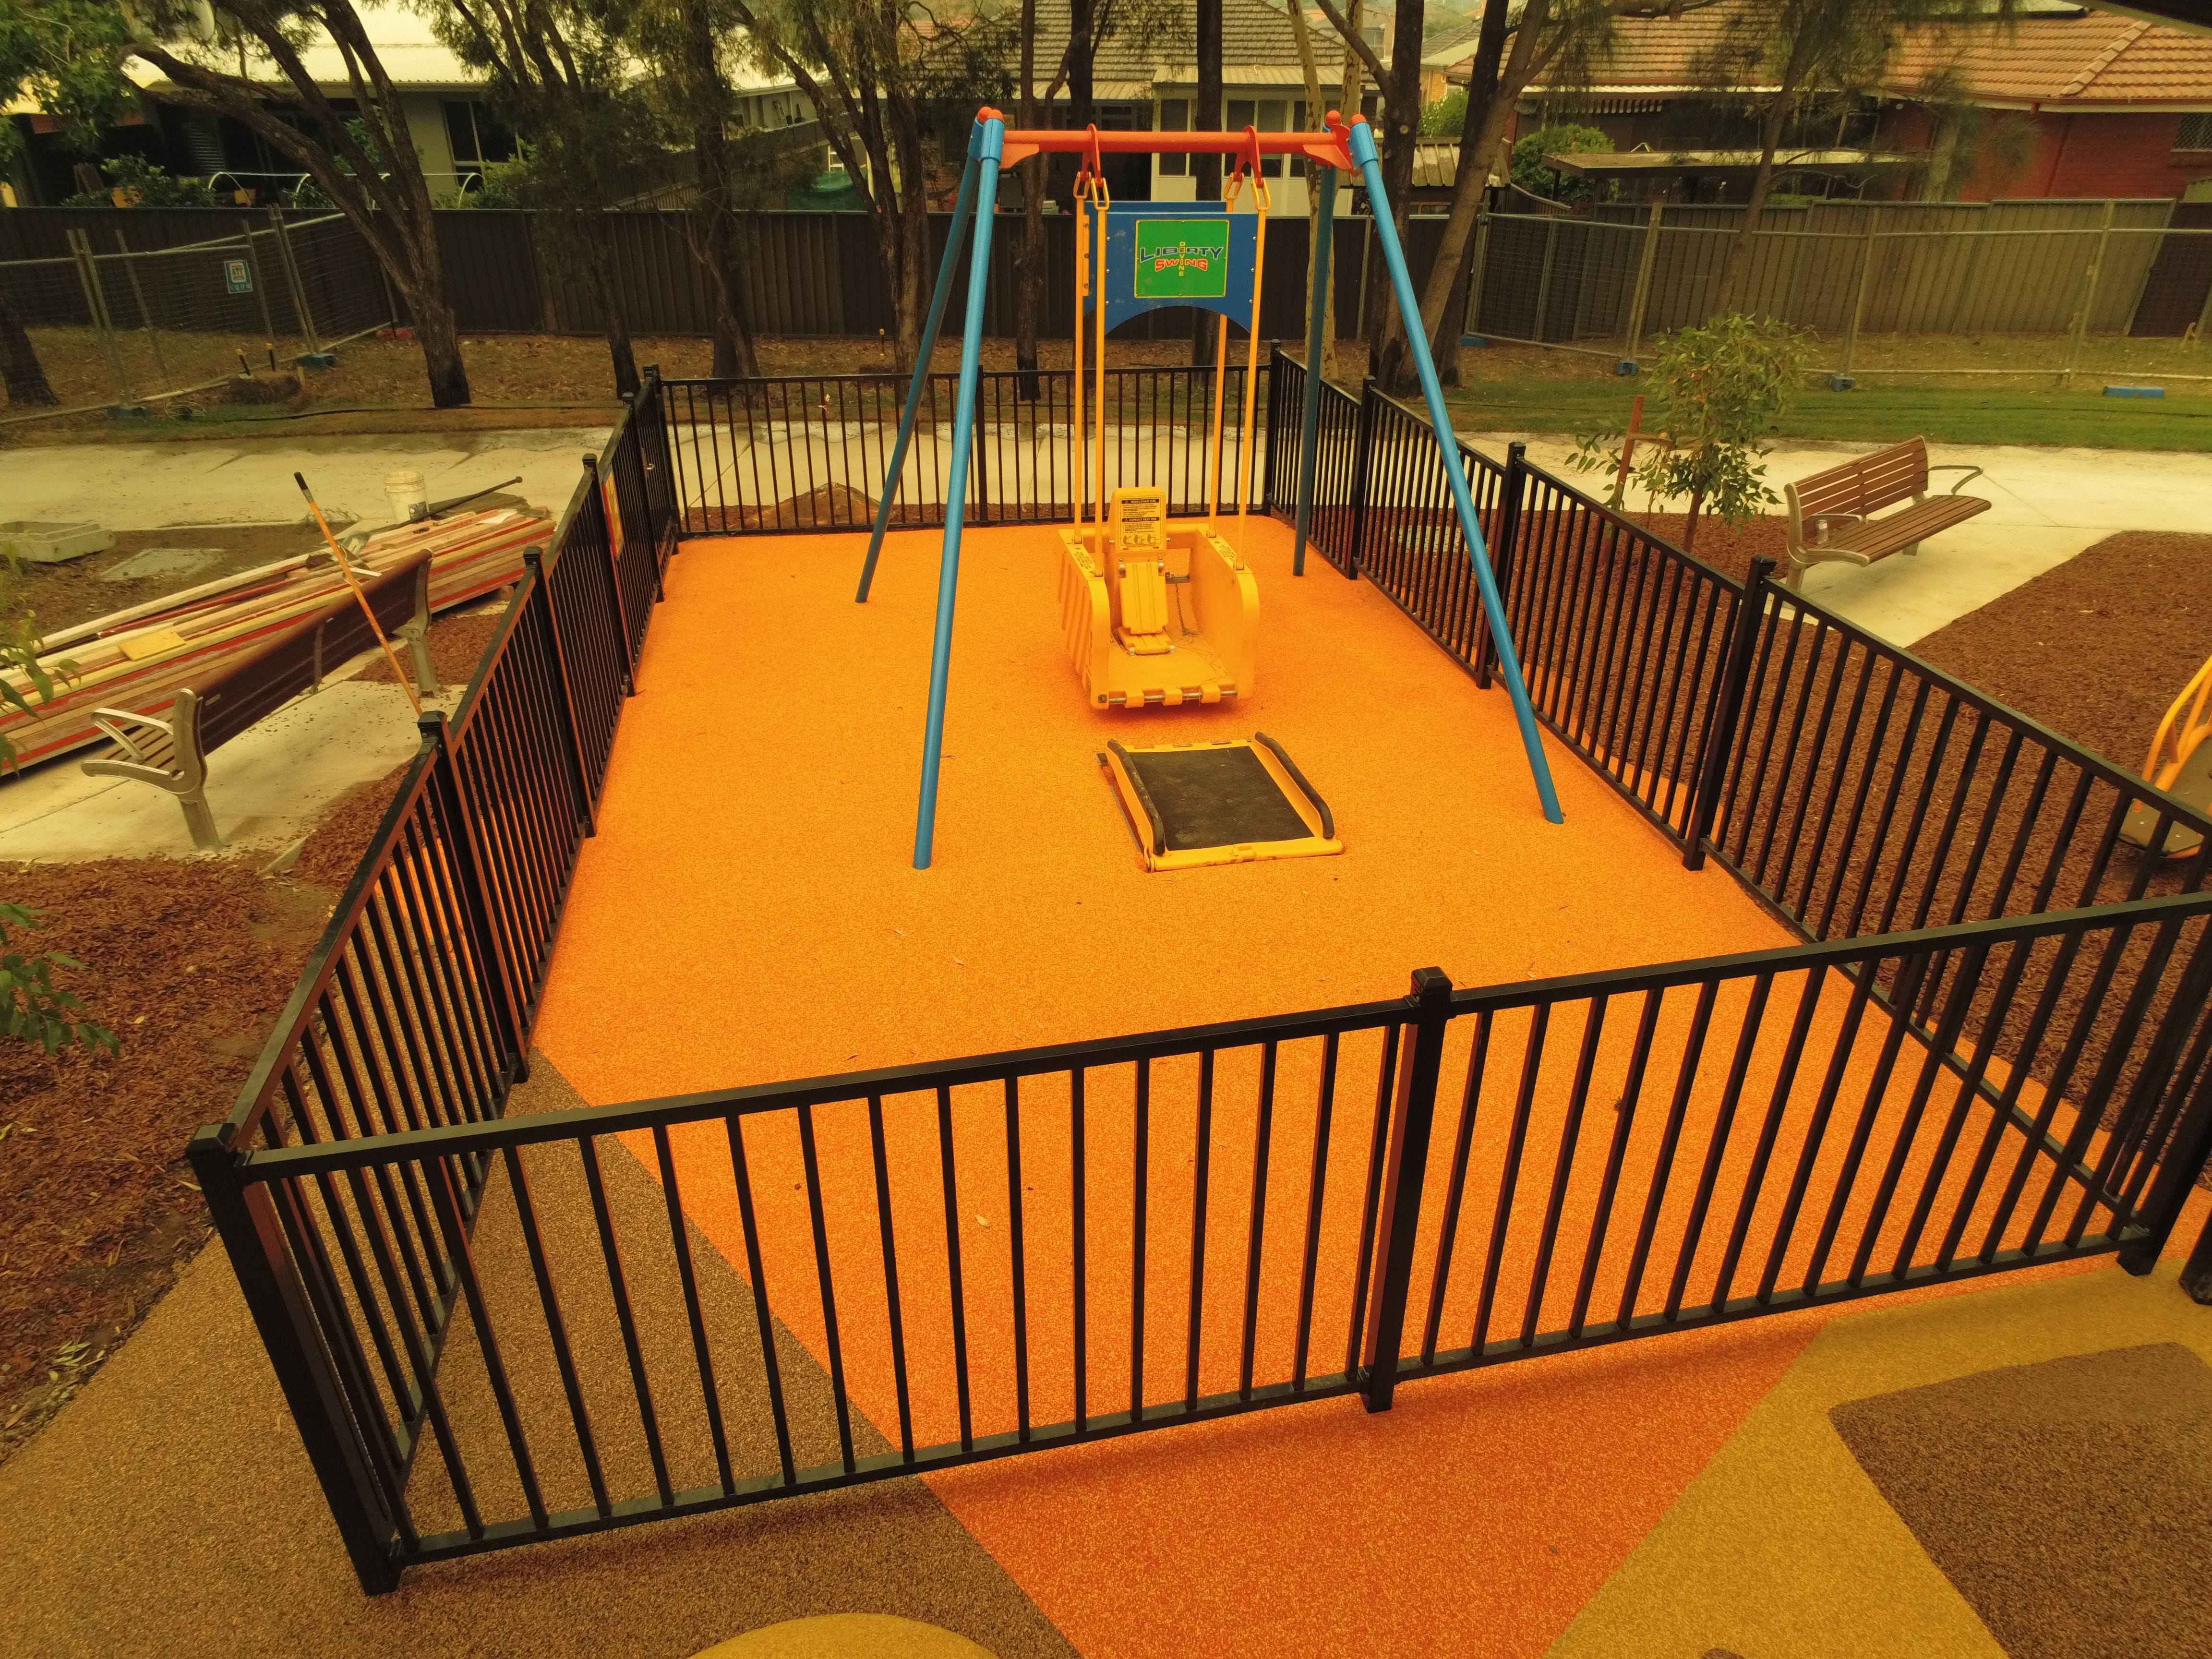 Synthatech Australia - Central Gardens All Ability Playground Image -5e1d2d6868b6c